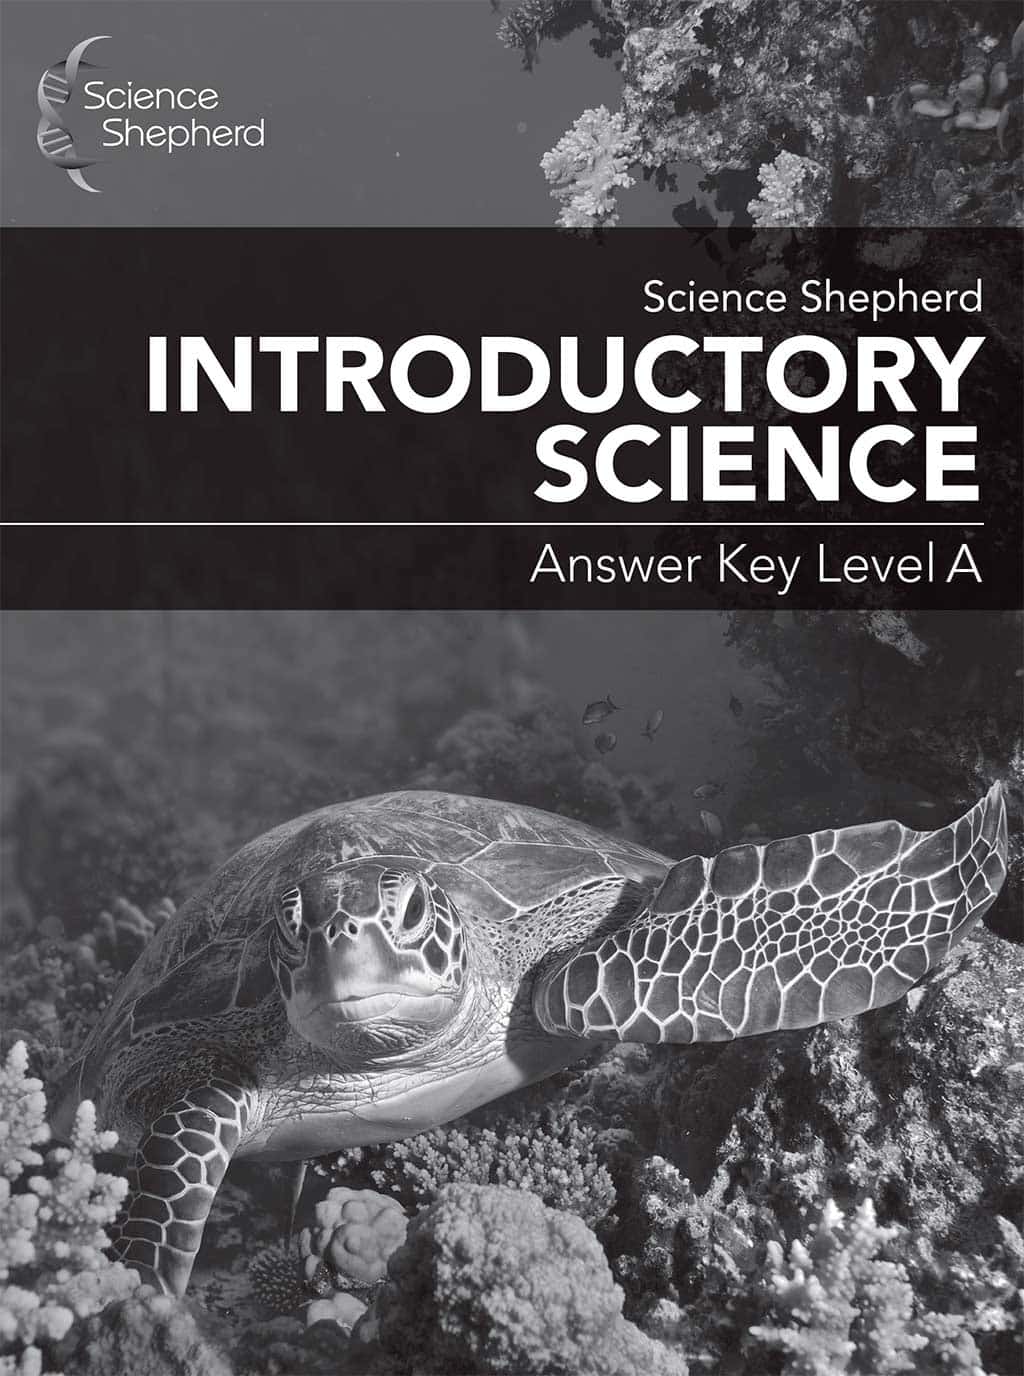 Science Shepherd Introductory Science homeschool online science Answer Key cover Level A